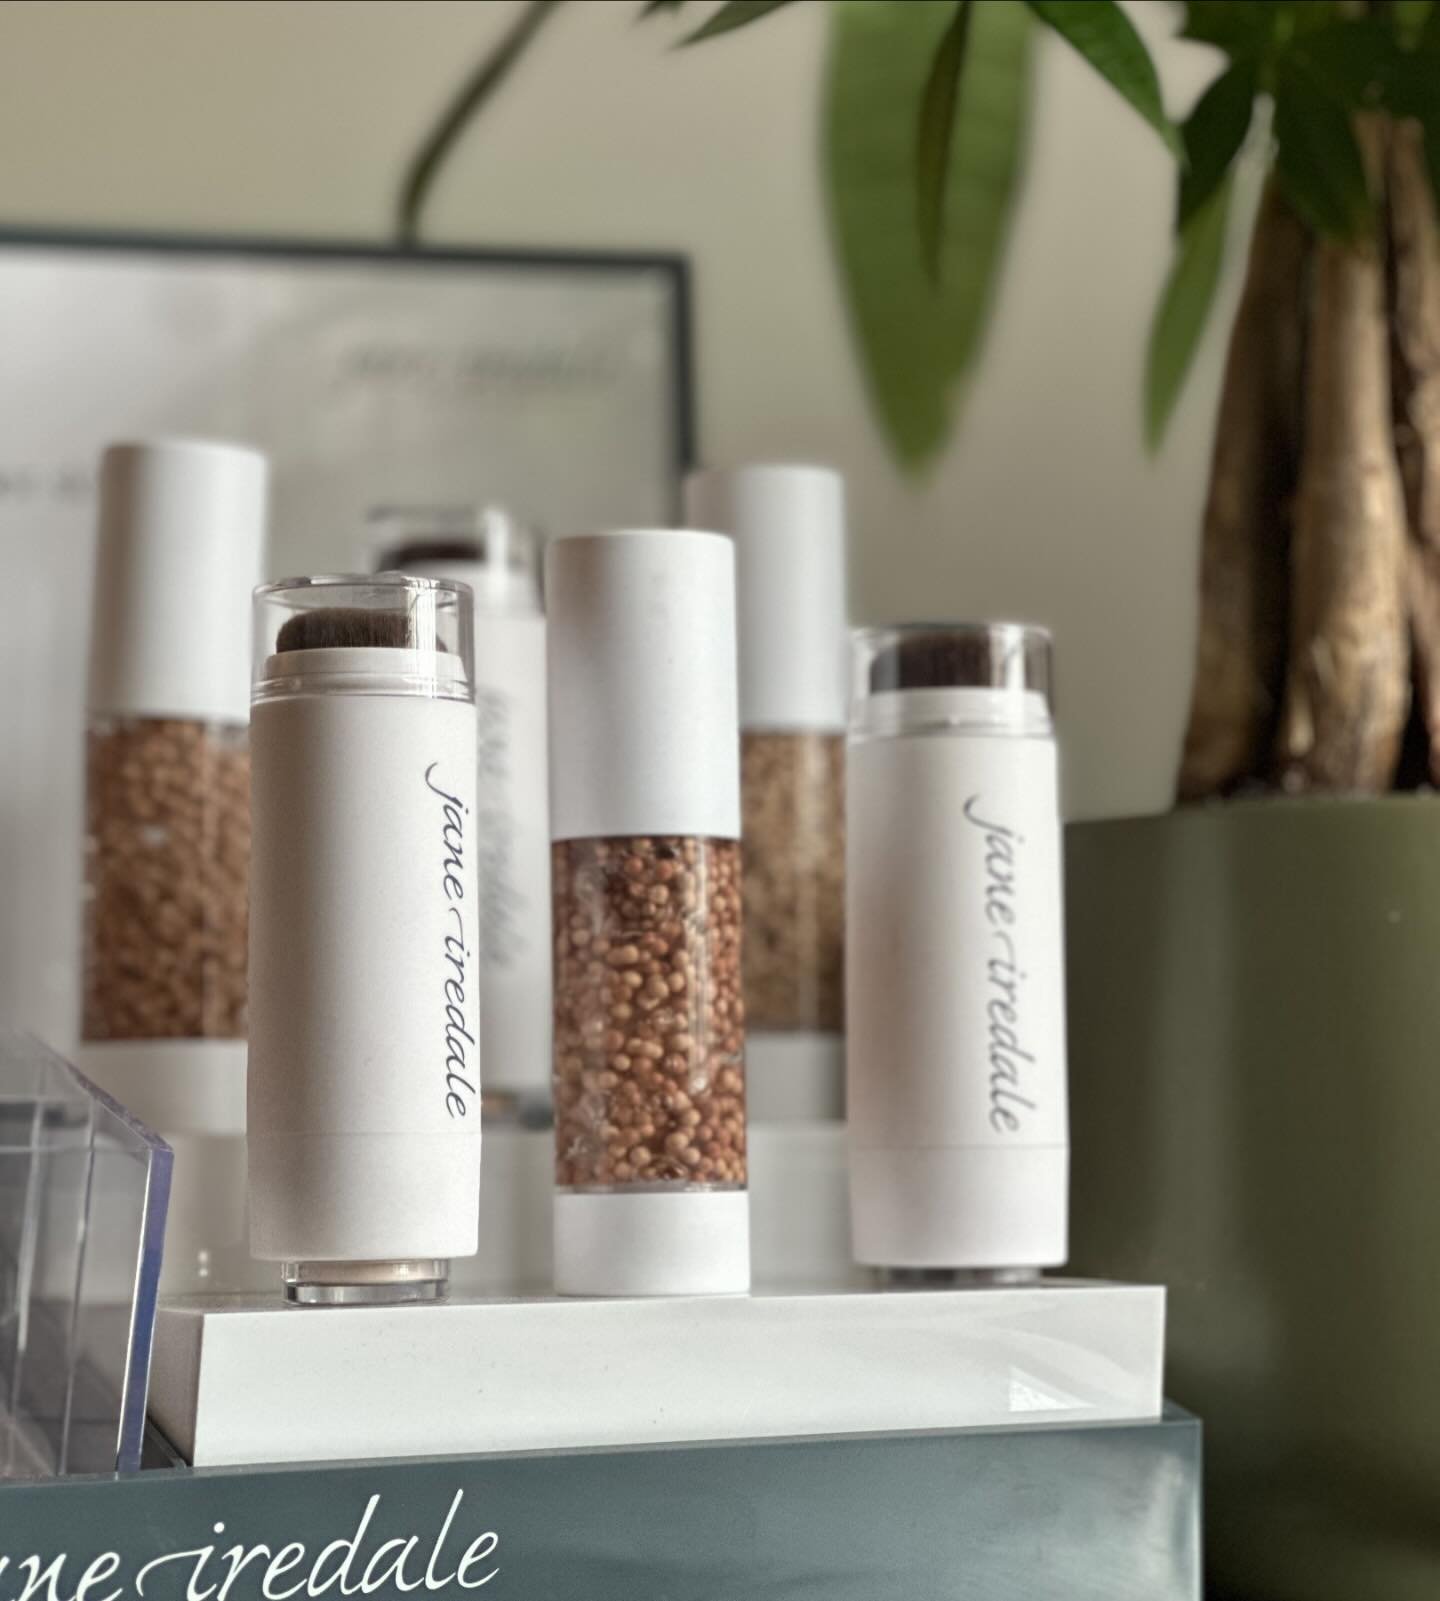 With the Weather getting warmer ☀️ , it&rsquo;s important to make sure you&rsquo;re protecting your skin! Stop in and checkout out our many Jane Iredale products that contain SPF! 🧴 
All Jane Iredale products are formulated with skin loving ingredie